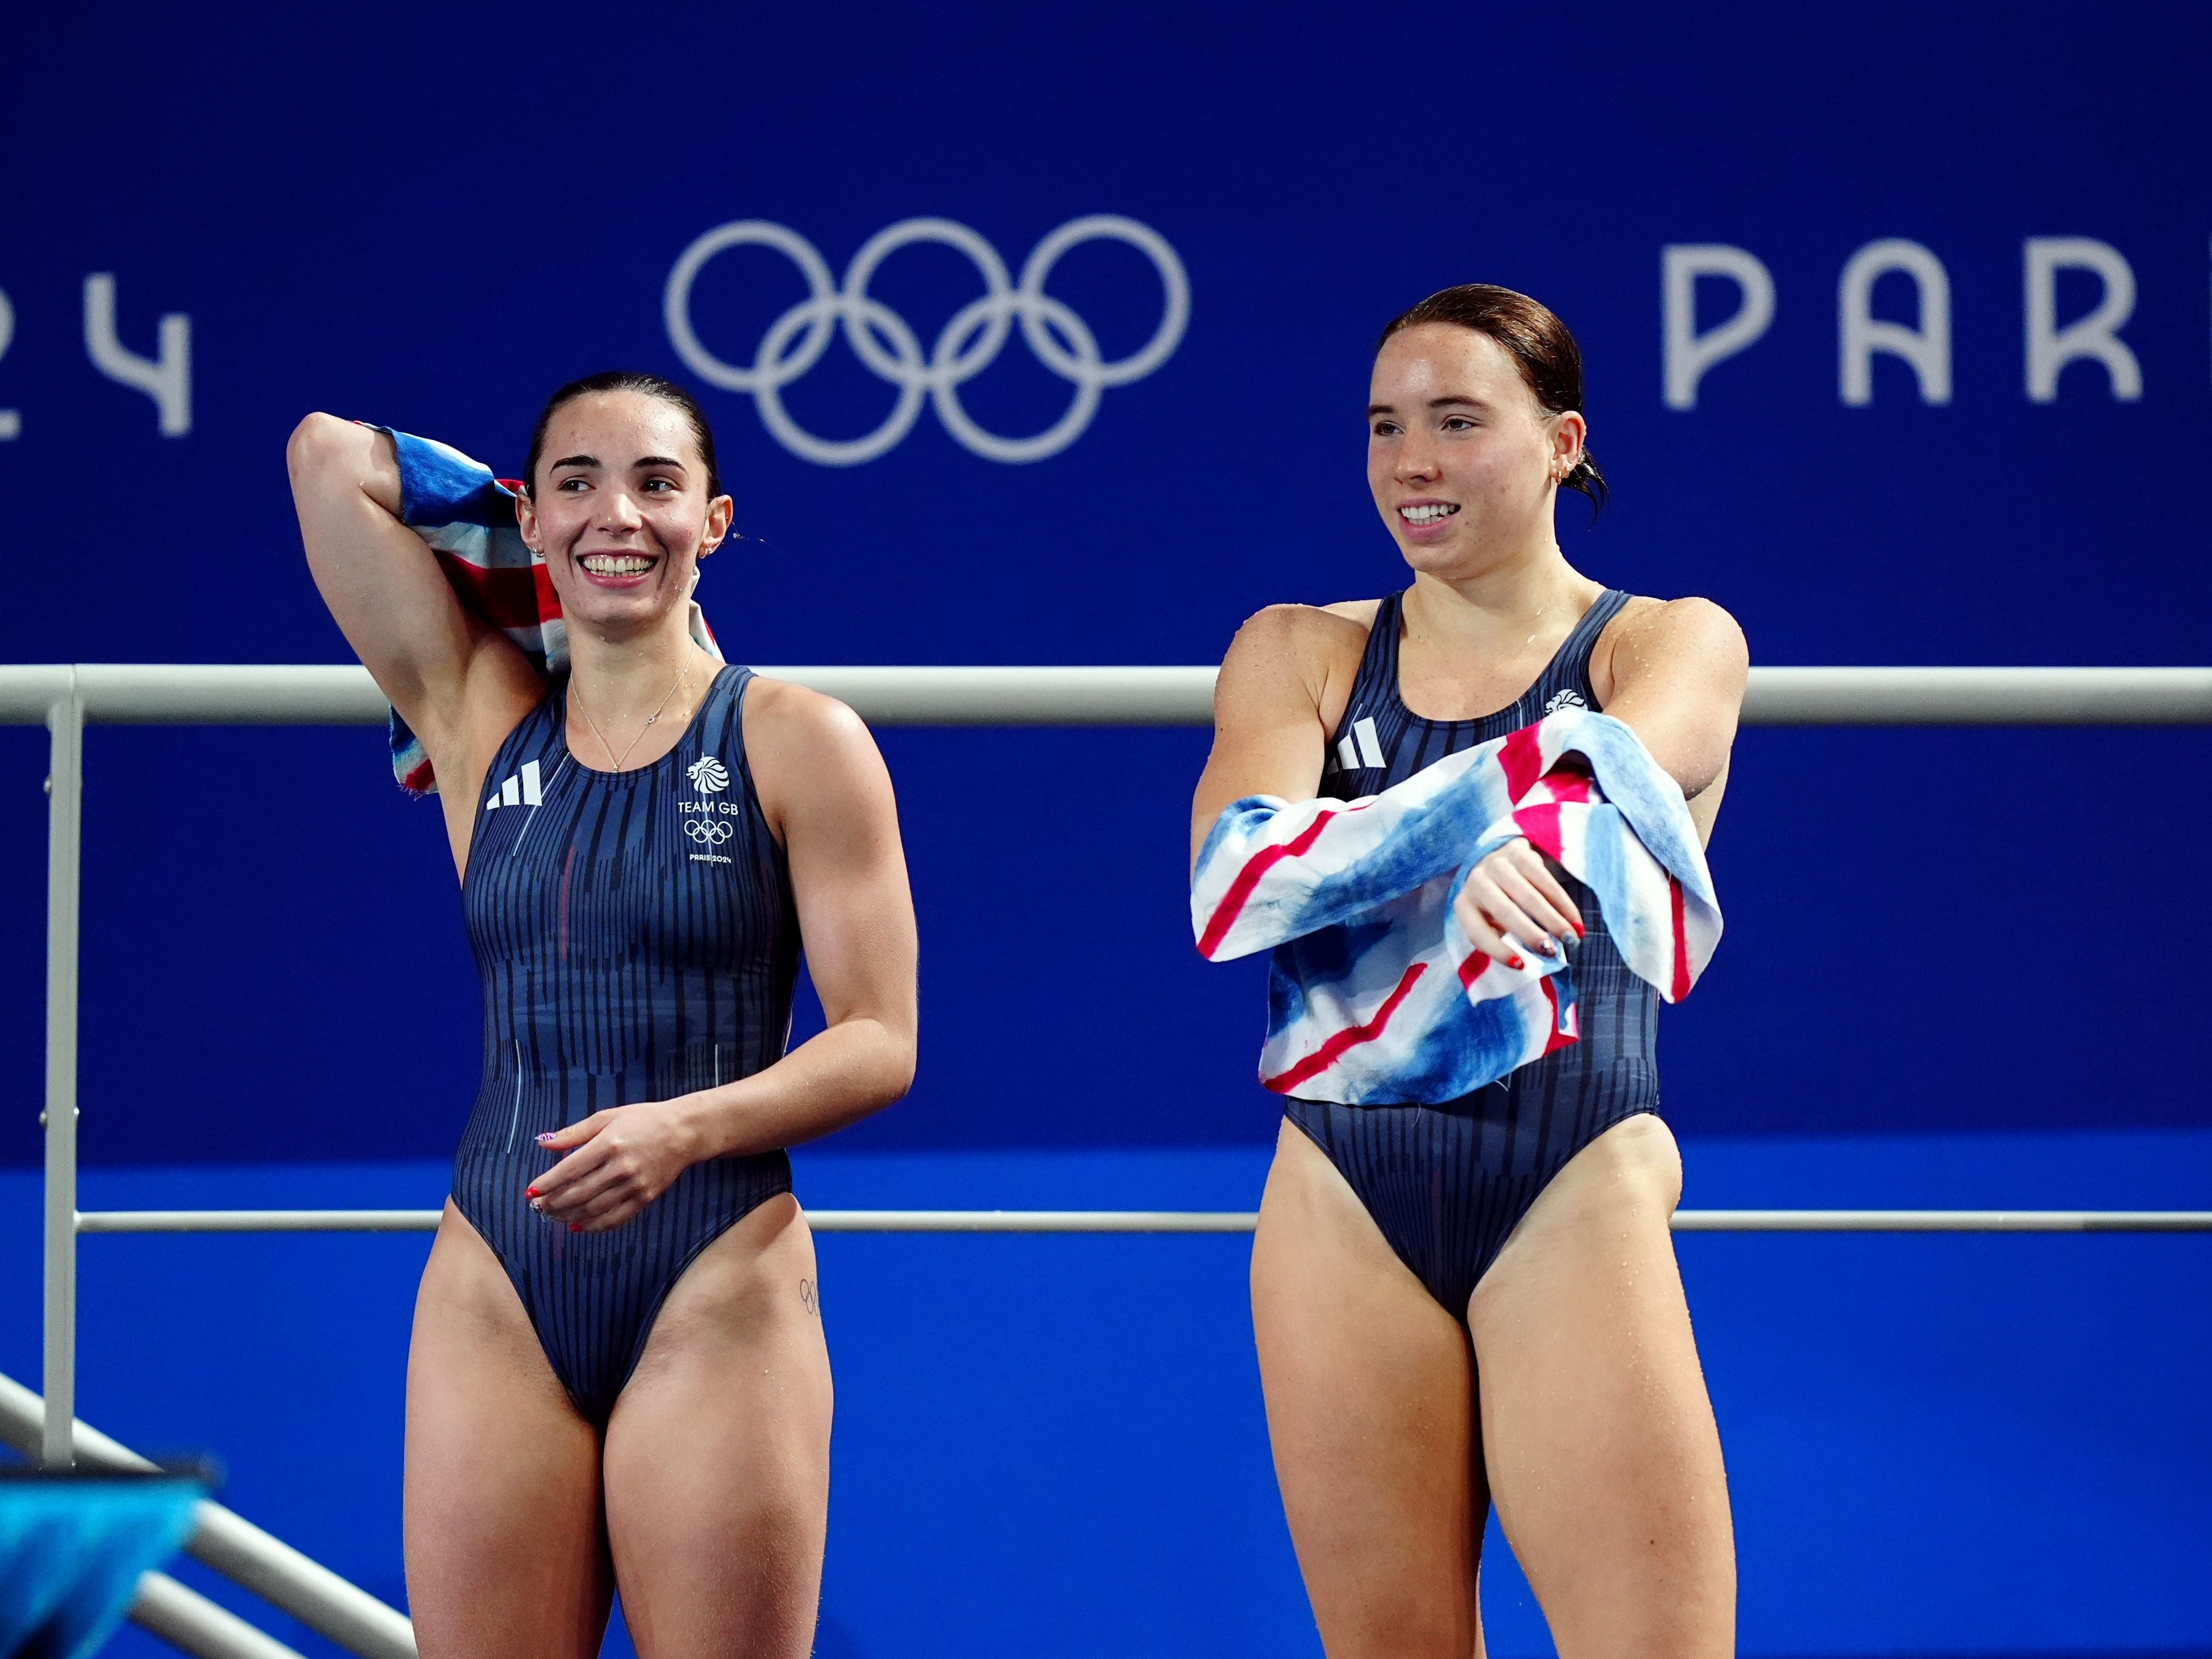 Yasmin Harper and Scarlett Mew Jensen claim GB first medal with diving bronze